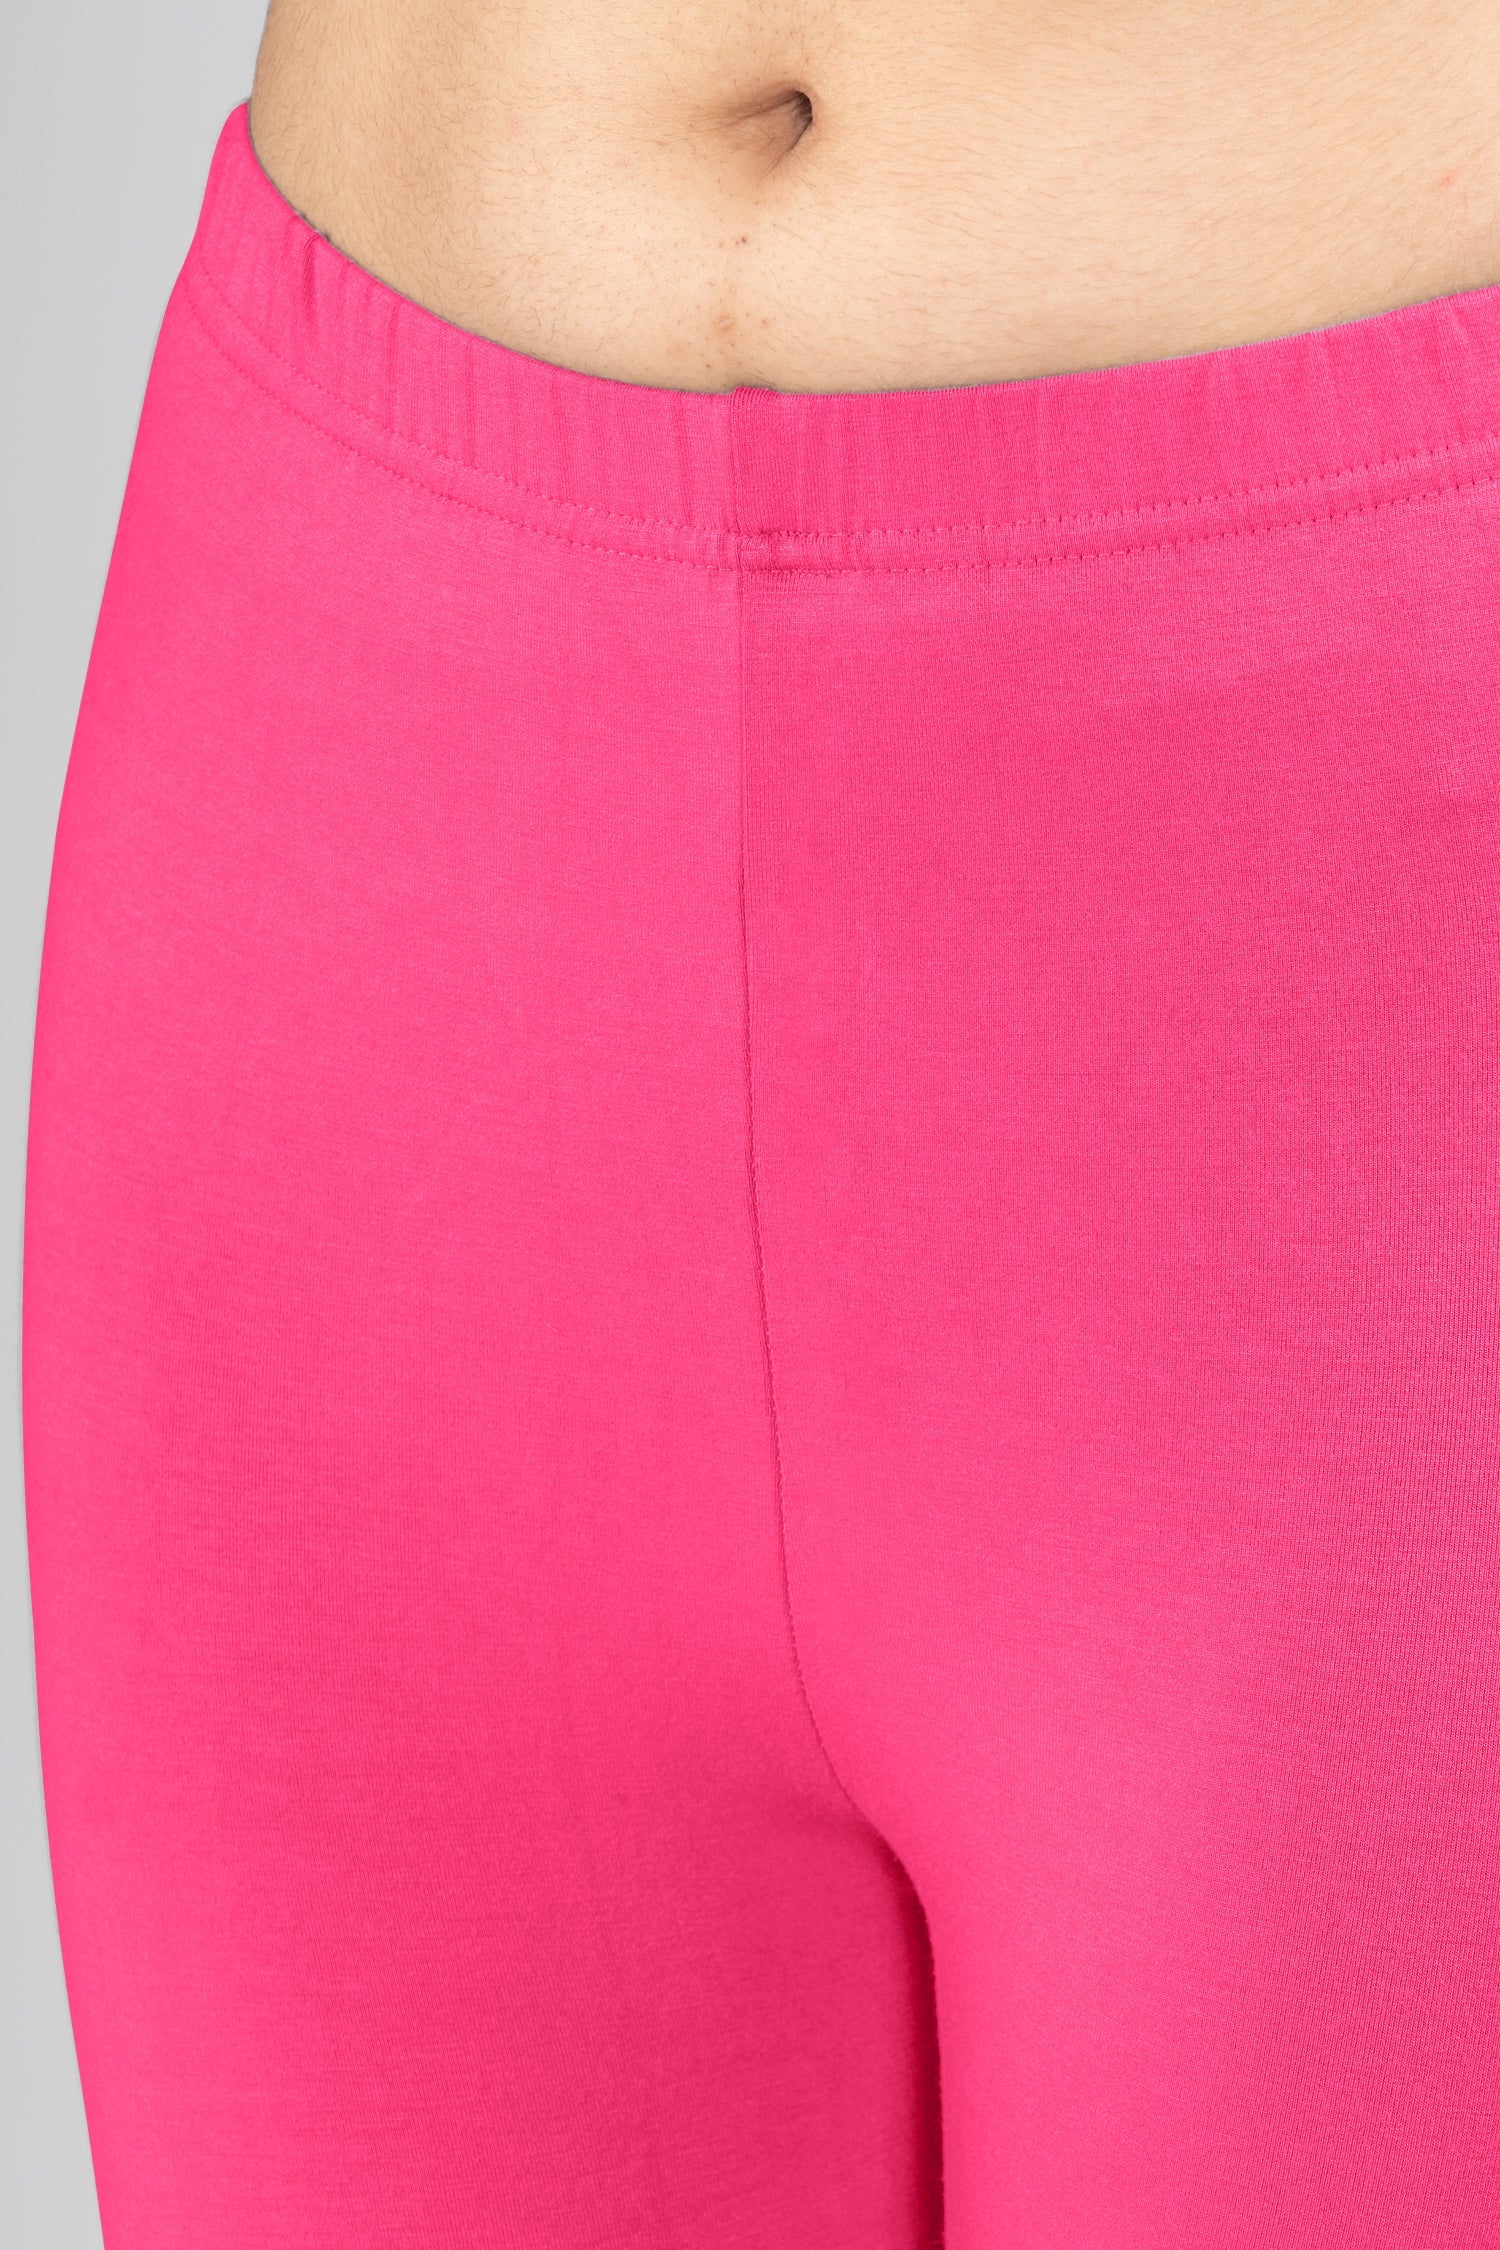 Passion Pink Viscose Ankle Leggings